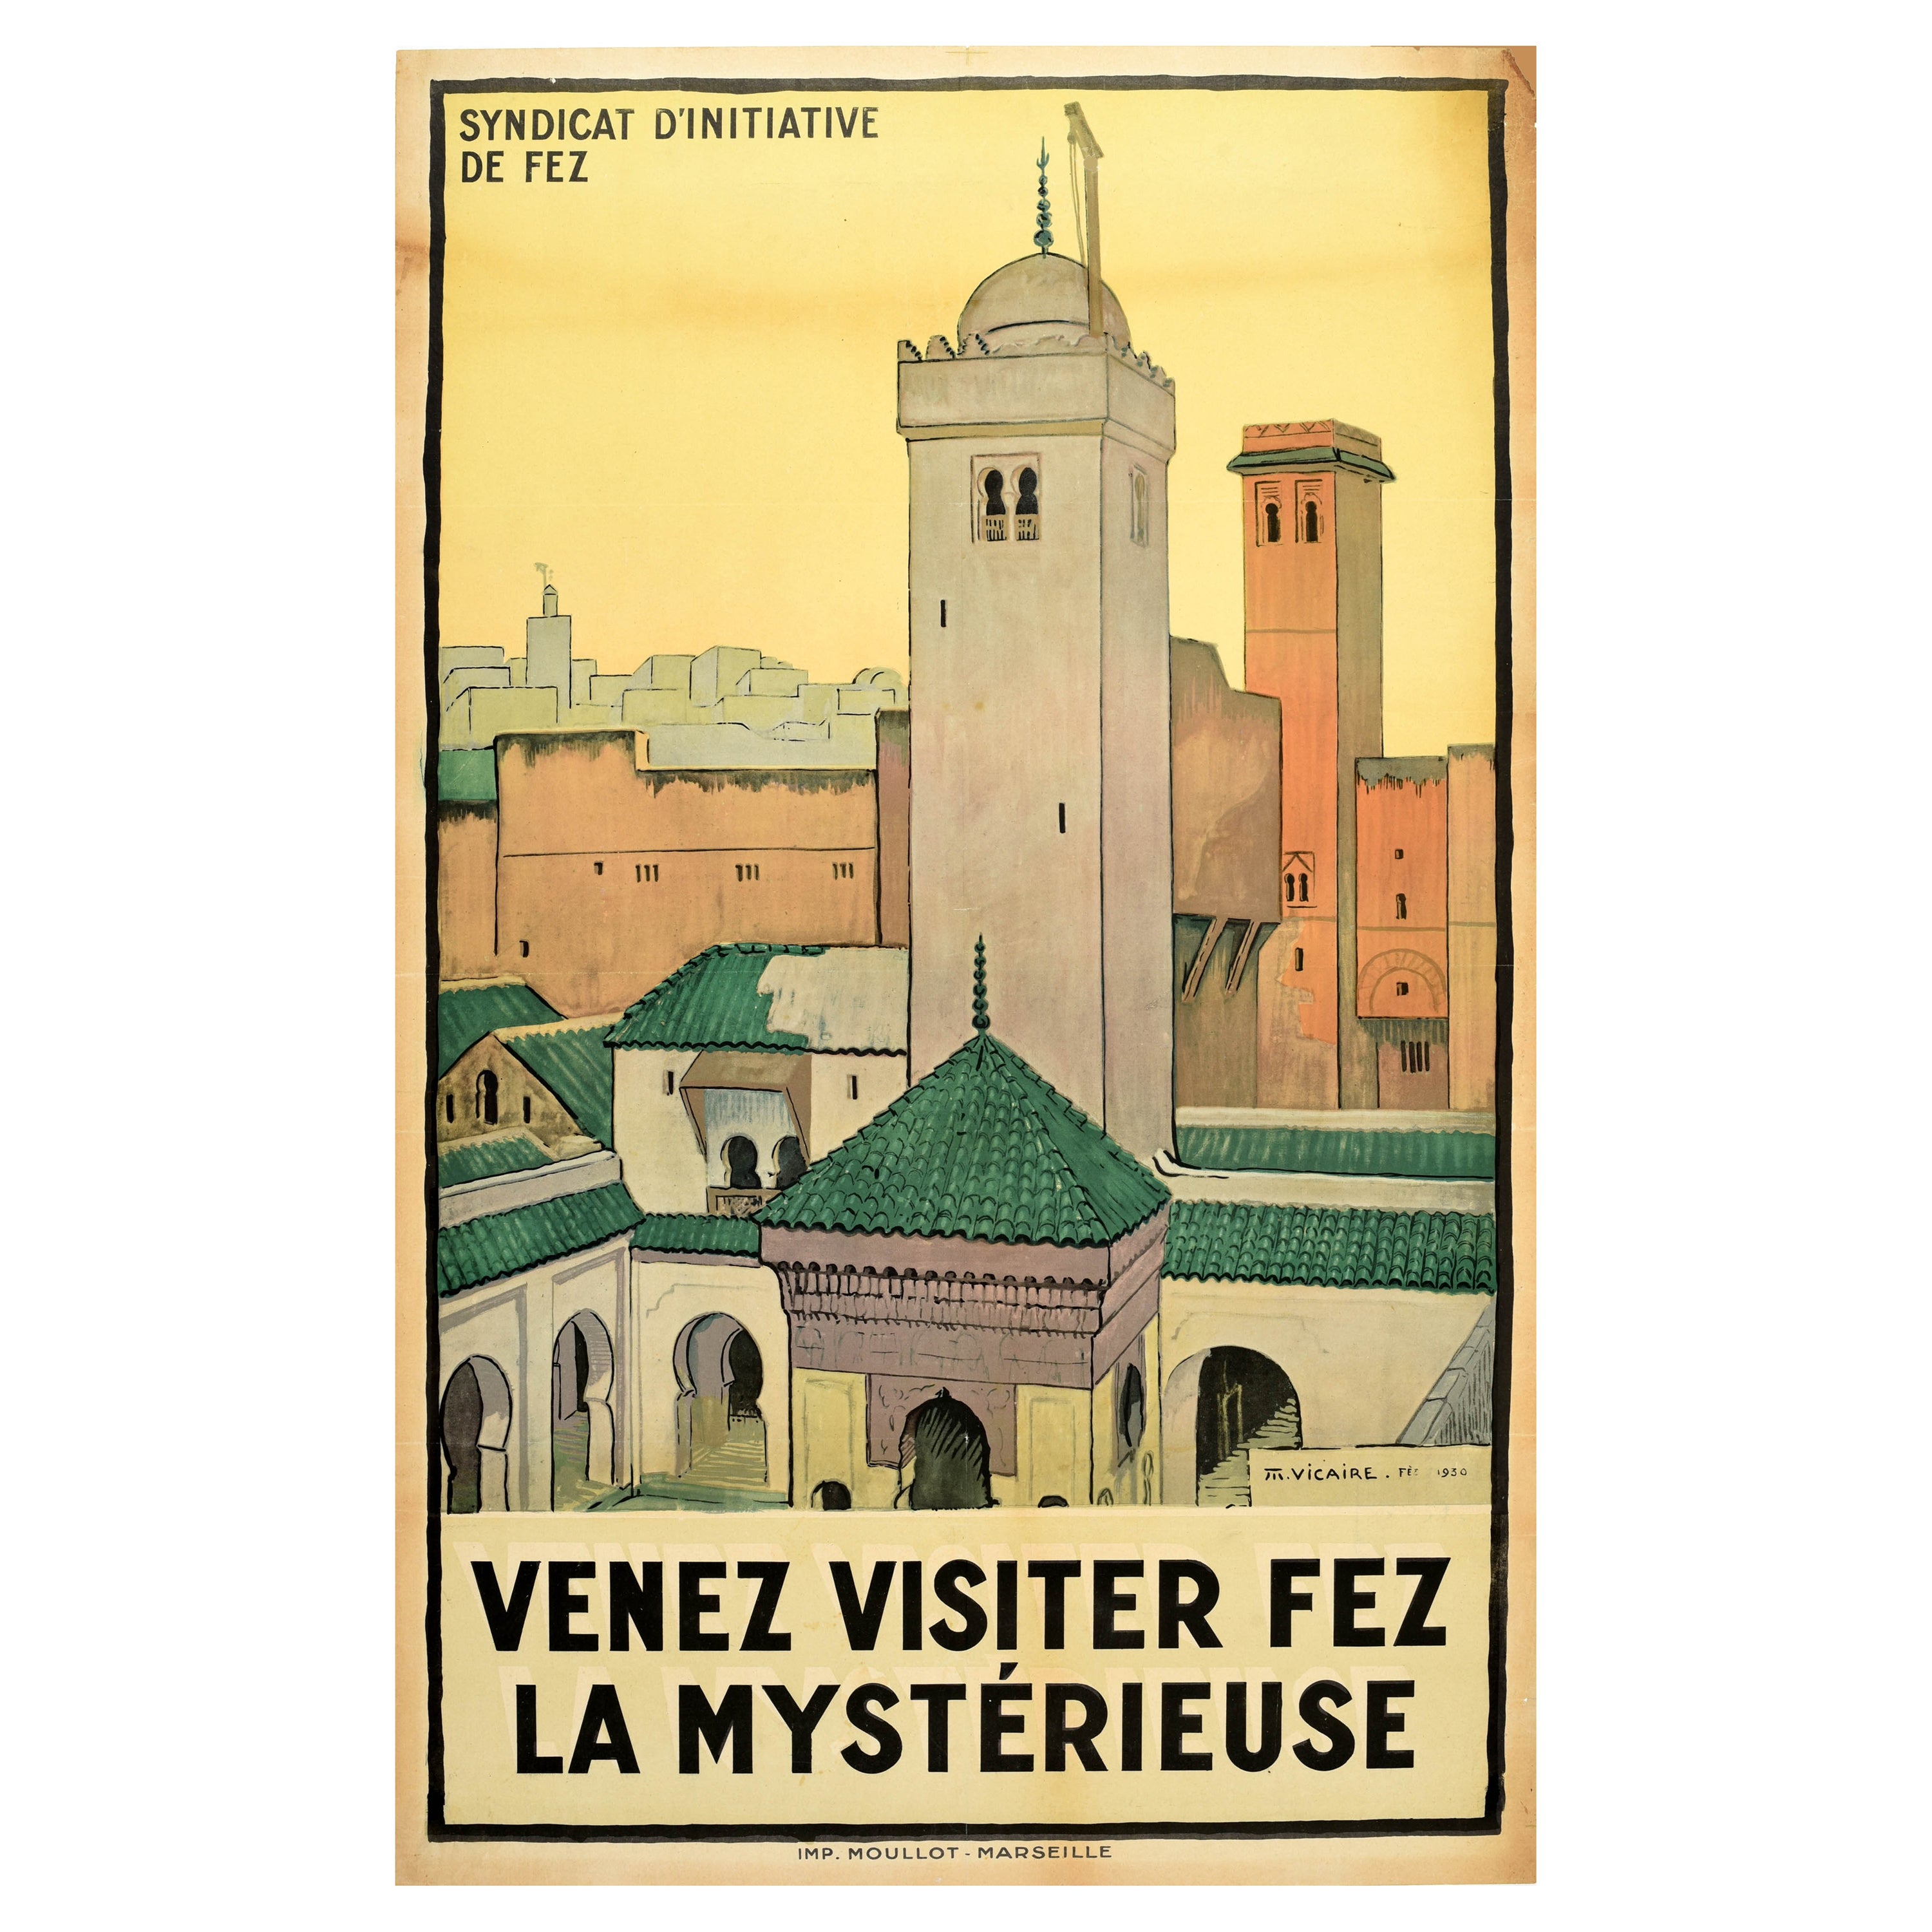 Original Vintage Travel Poster Fez Morocco North Africa Mysterious City Vicaire For Sale